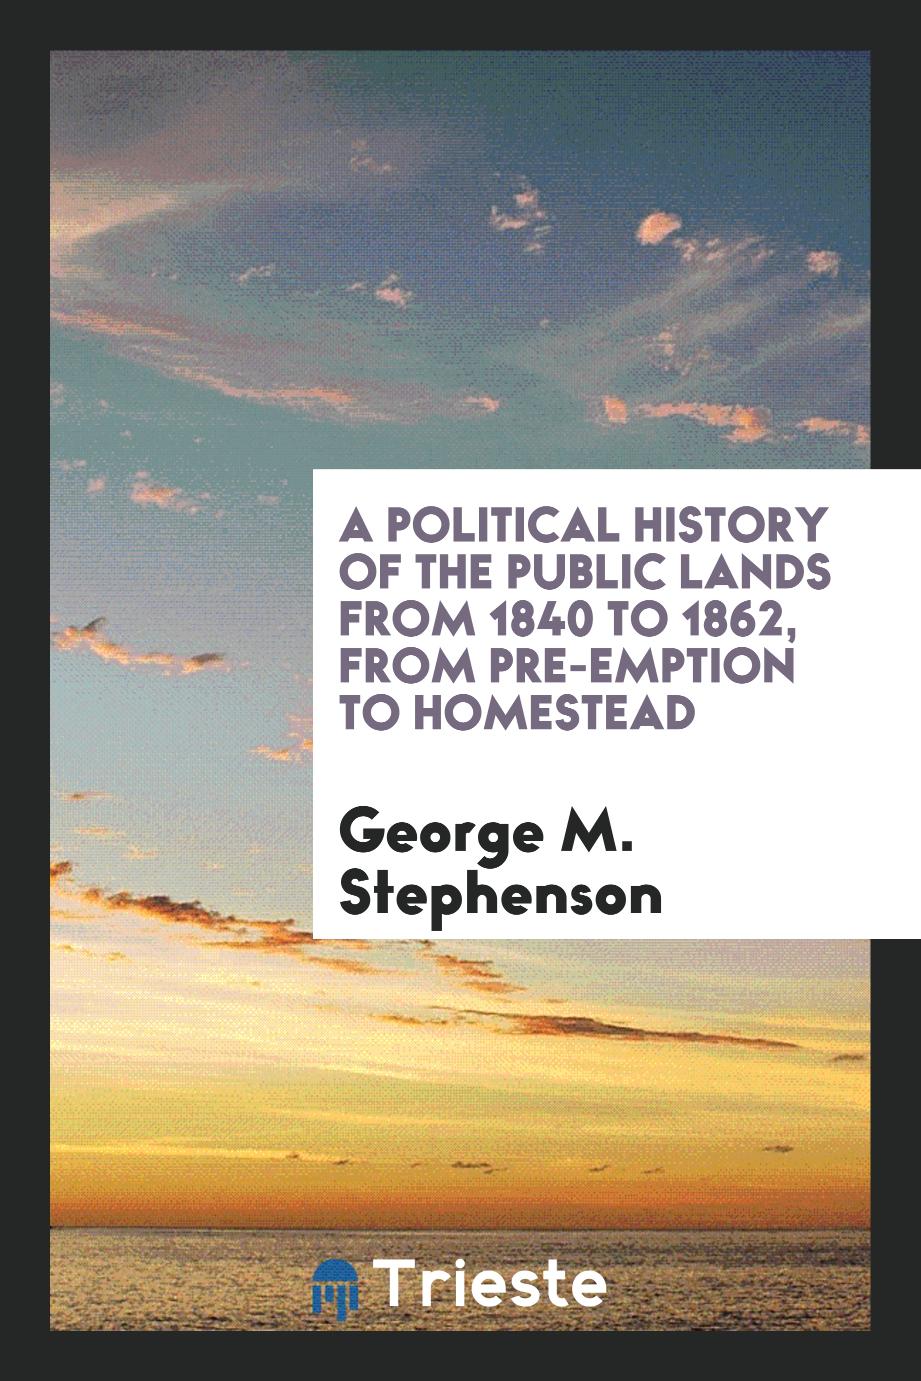 A Political History of the Public Lands from 1840 to 1862, from Pre-Emption to Homestead